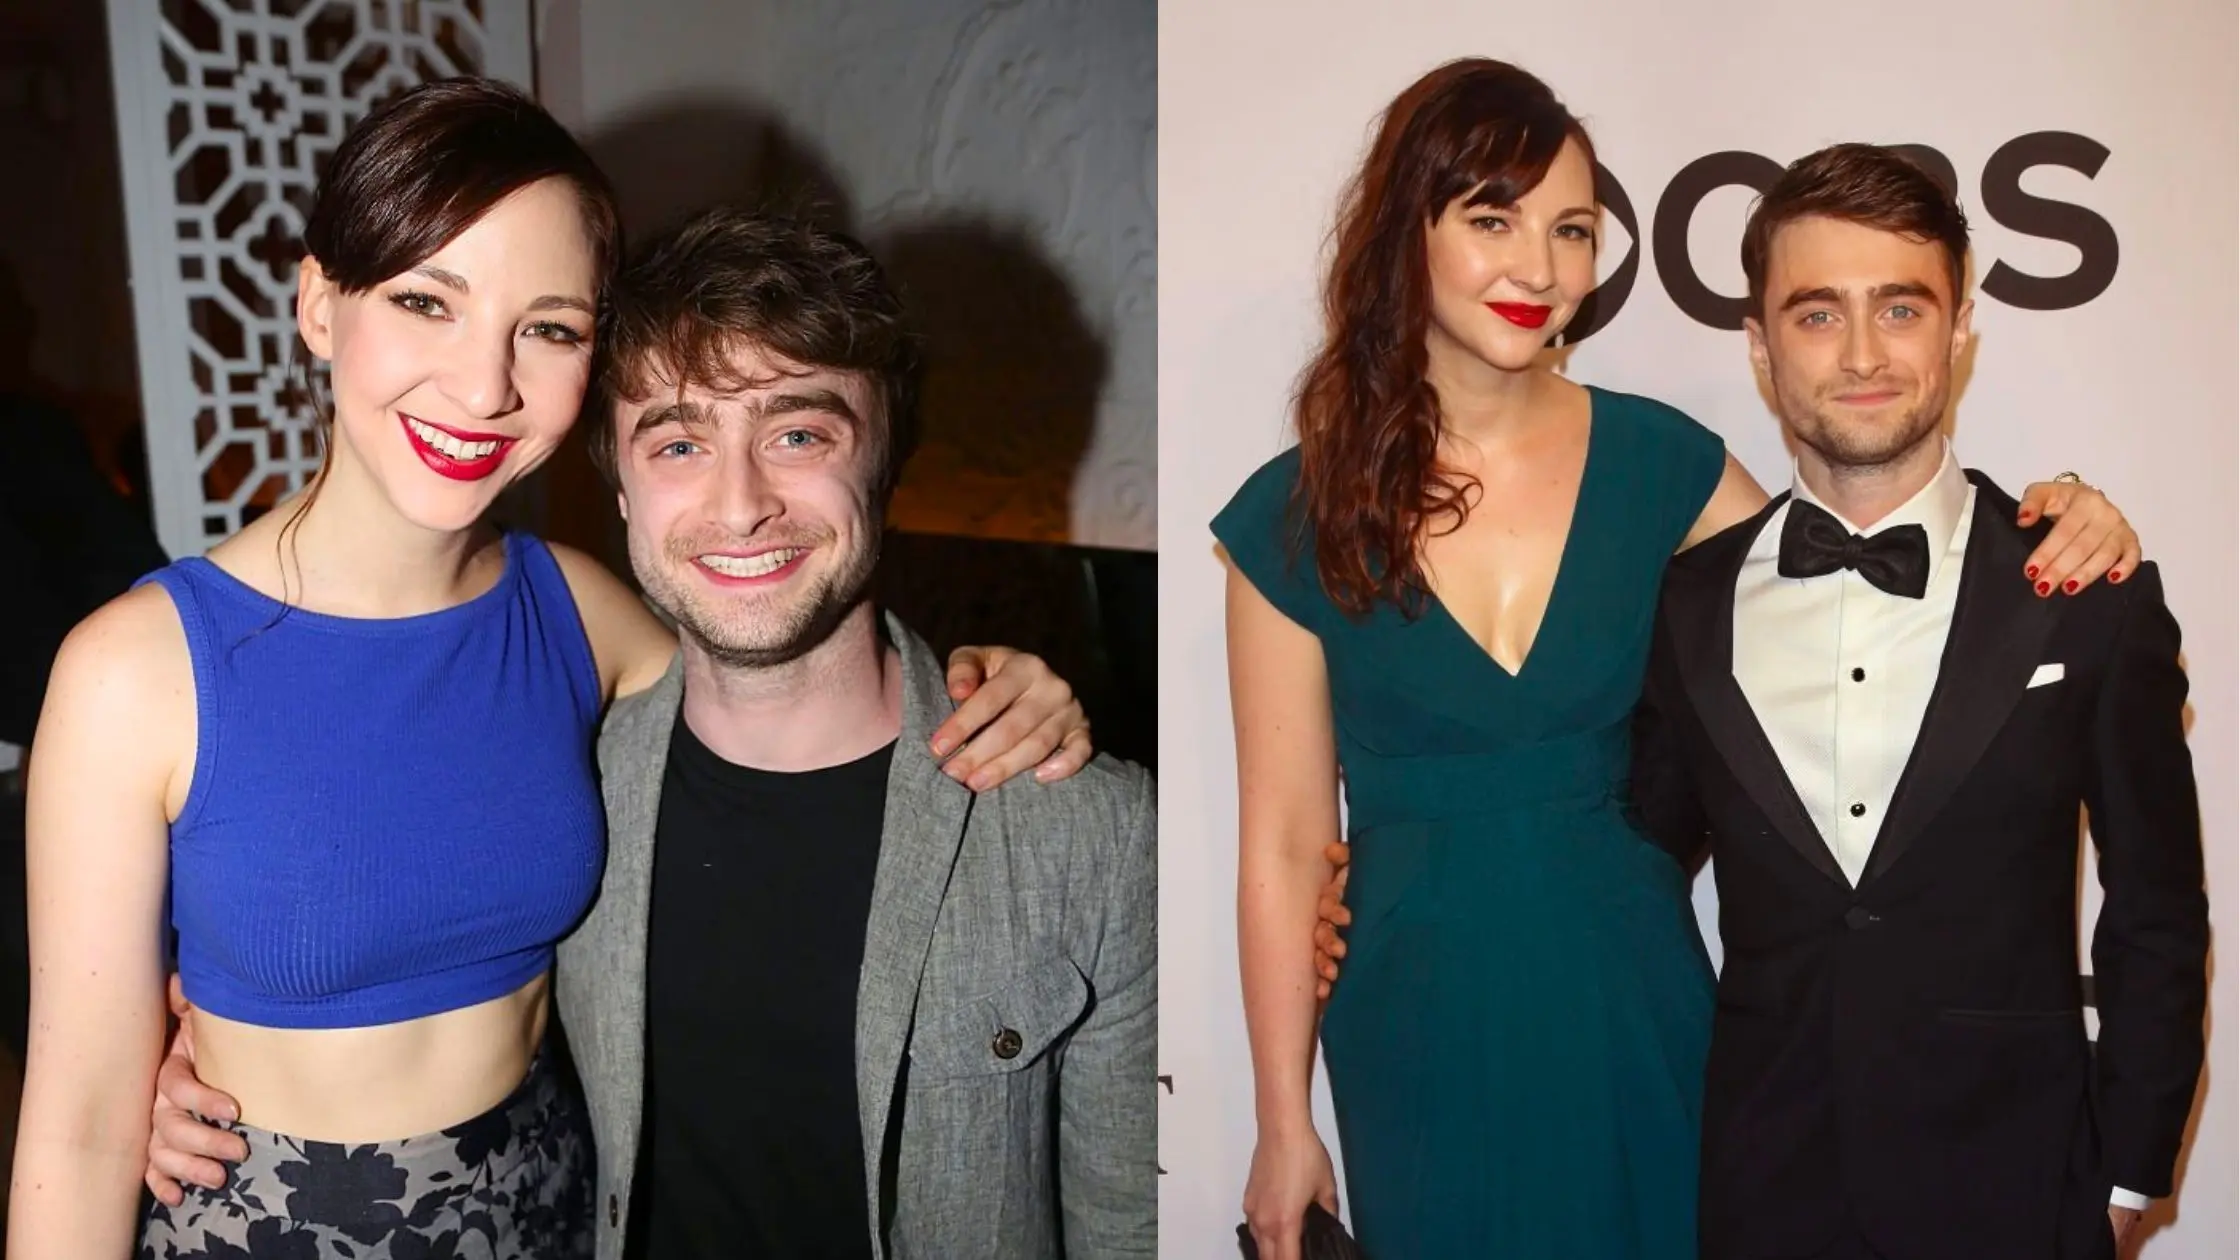 Daniel Radcliffe's Girlfriend Erin Drake Is Pregnant With Their First Child